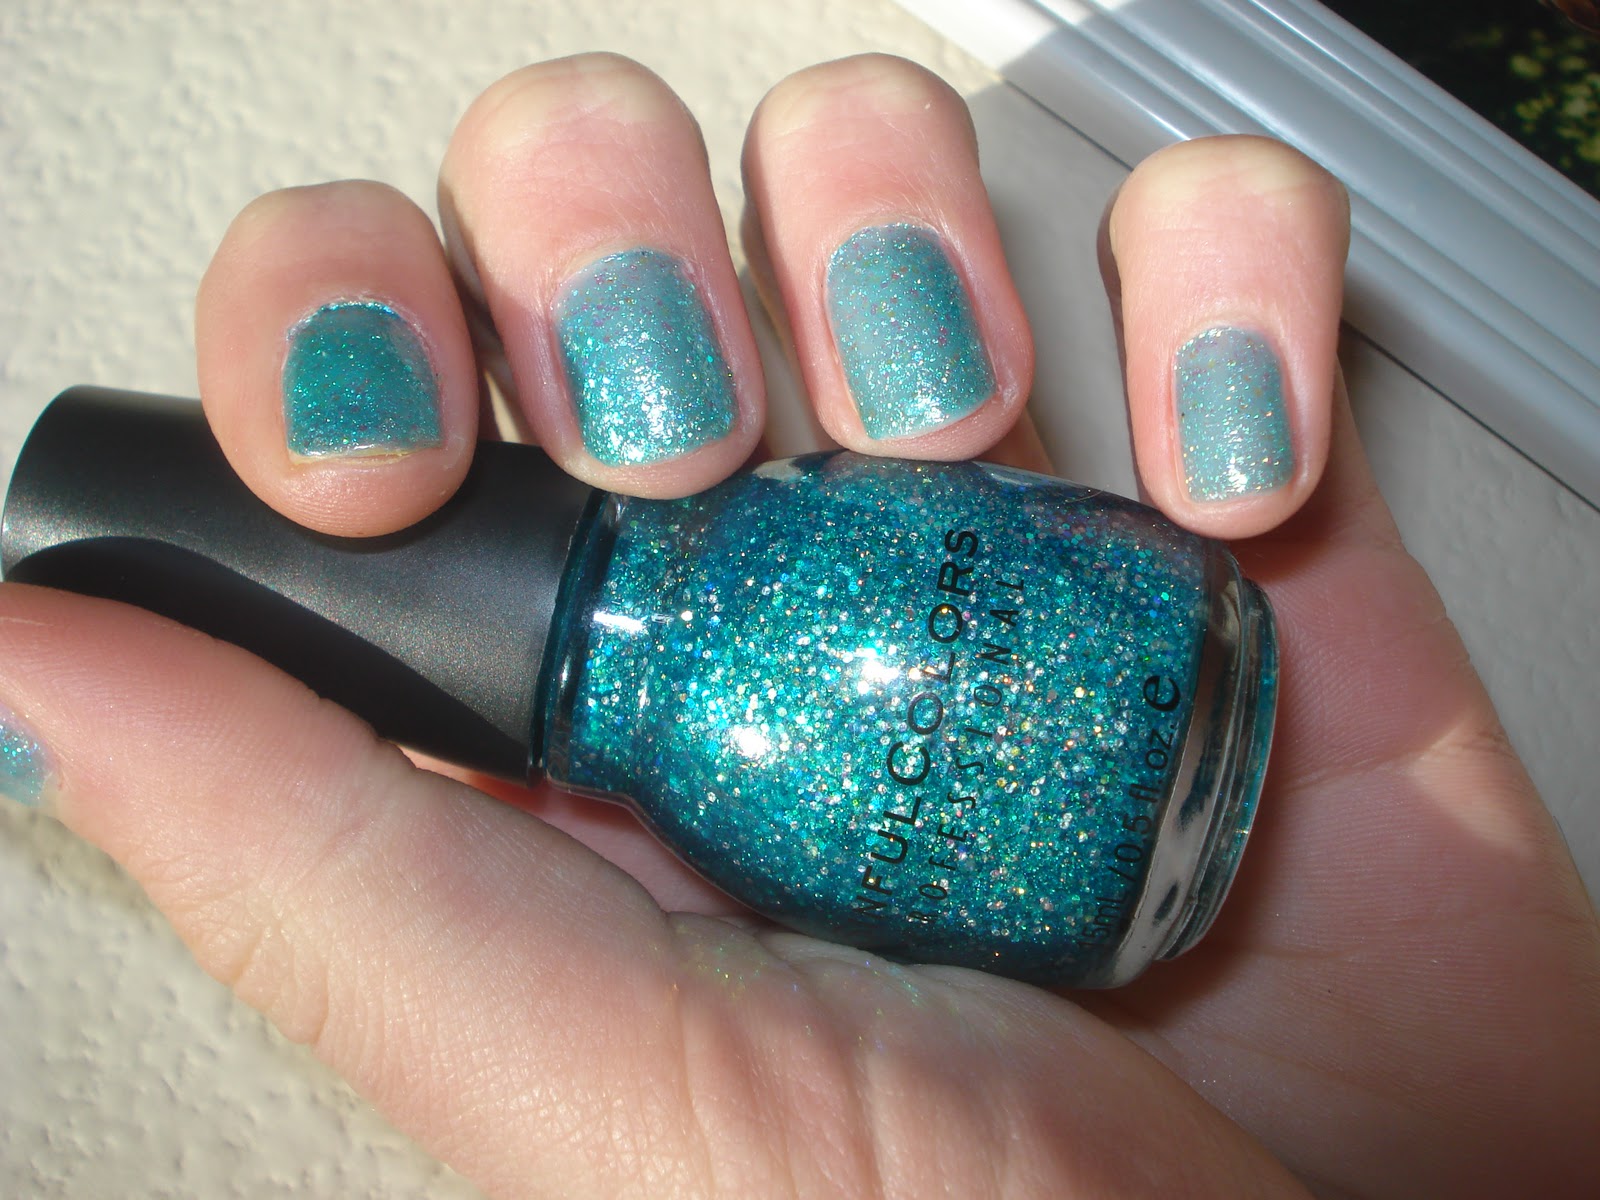 1. Sinful Colors Nail Polish in Rainstorm - wide 9